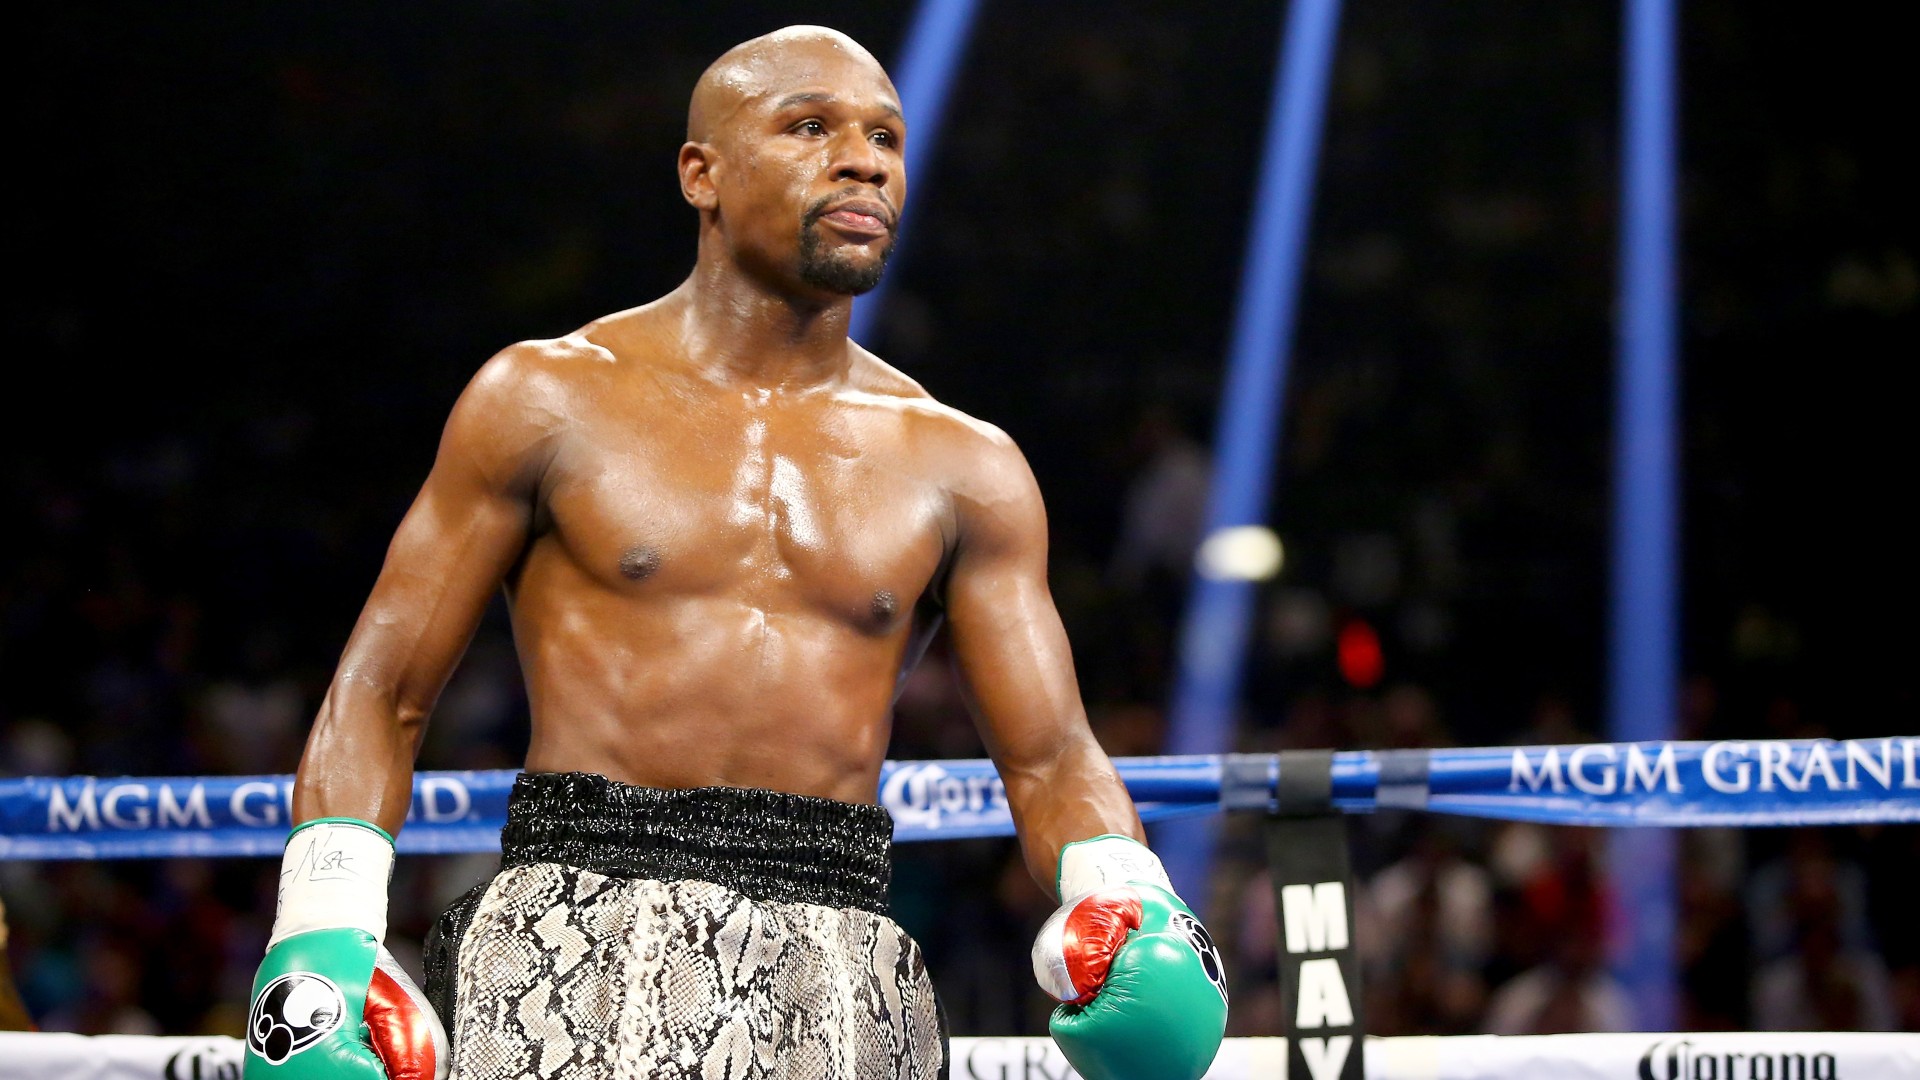 Boxer Floyd Mayweather Jr. Sends Aid to Israel After Terror Attacks via Jet.